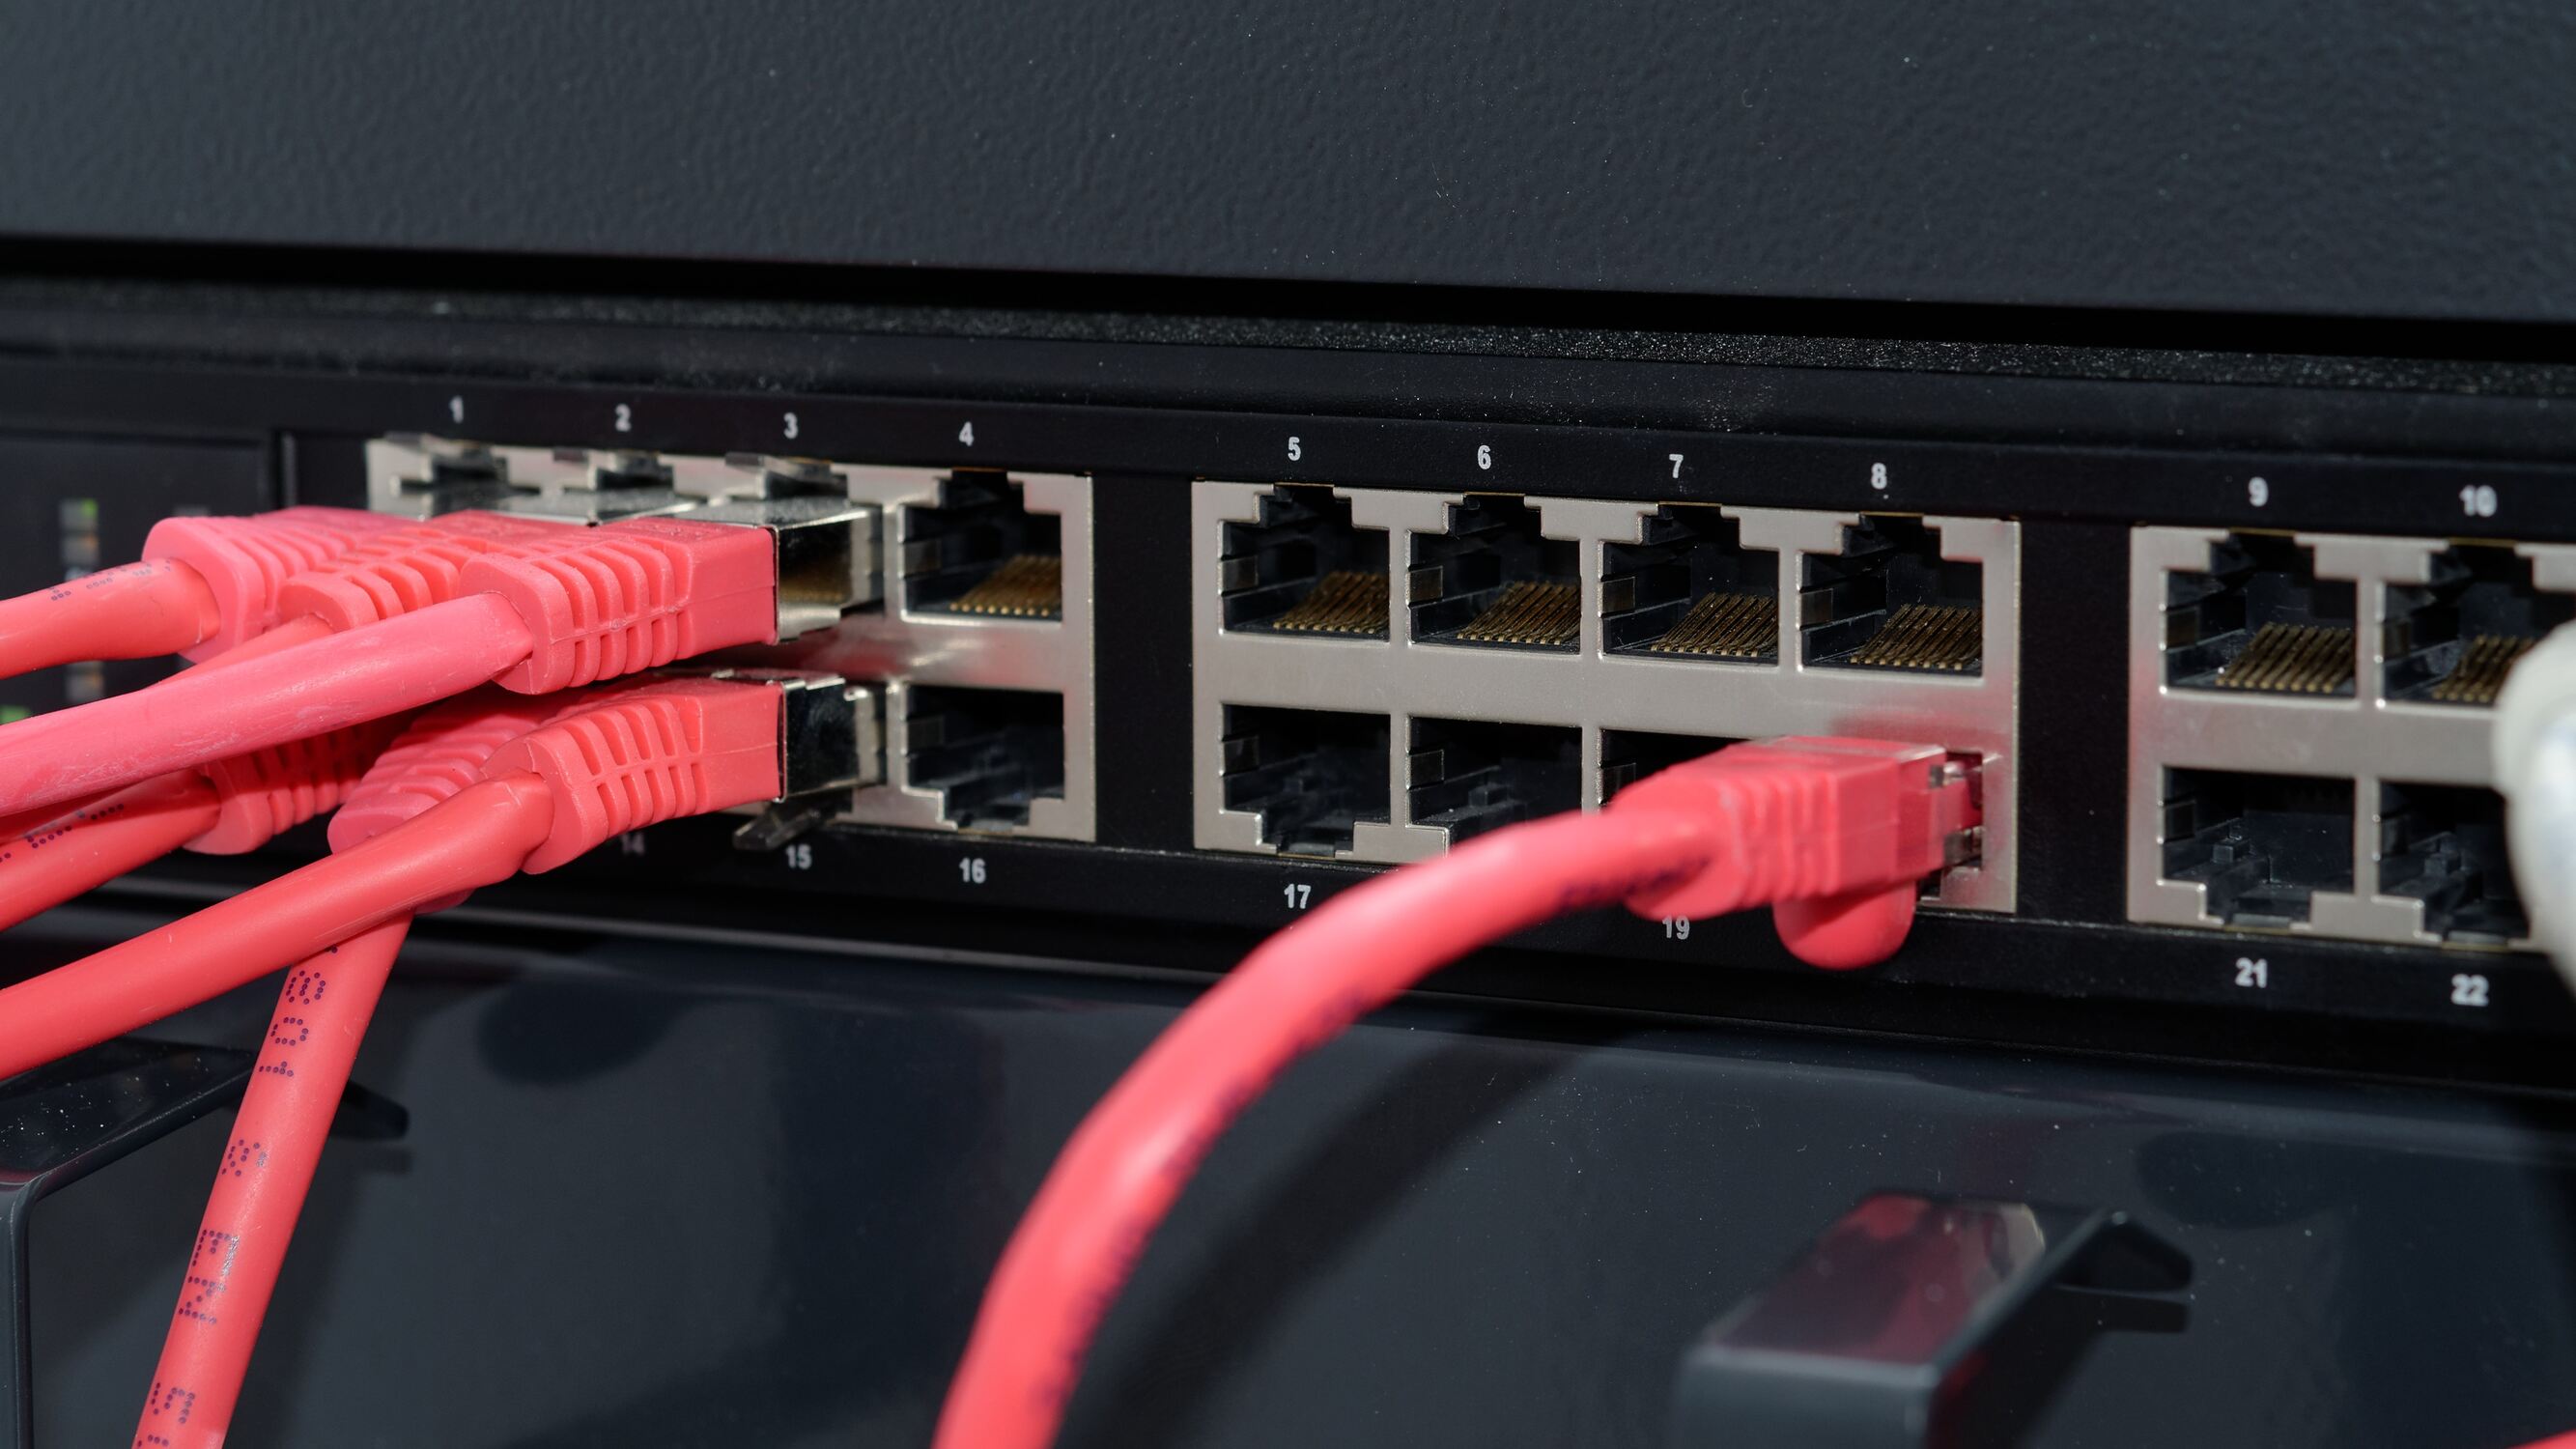 How To Turn Off Smart Network Switch